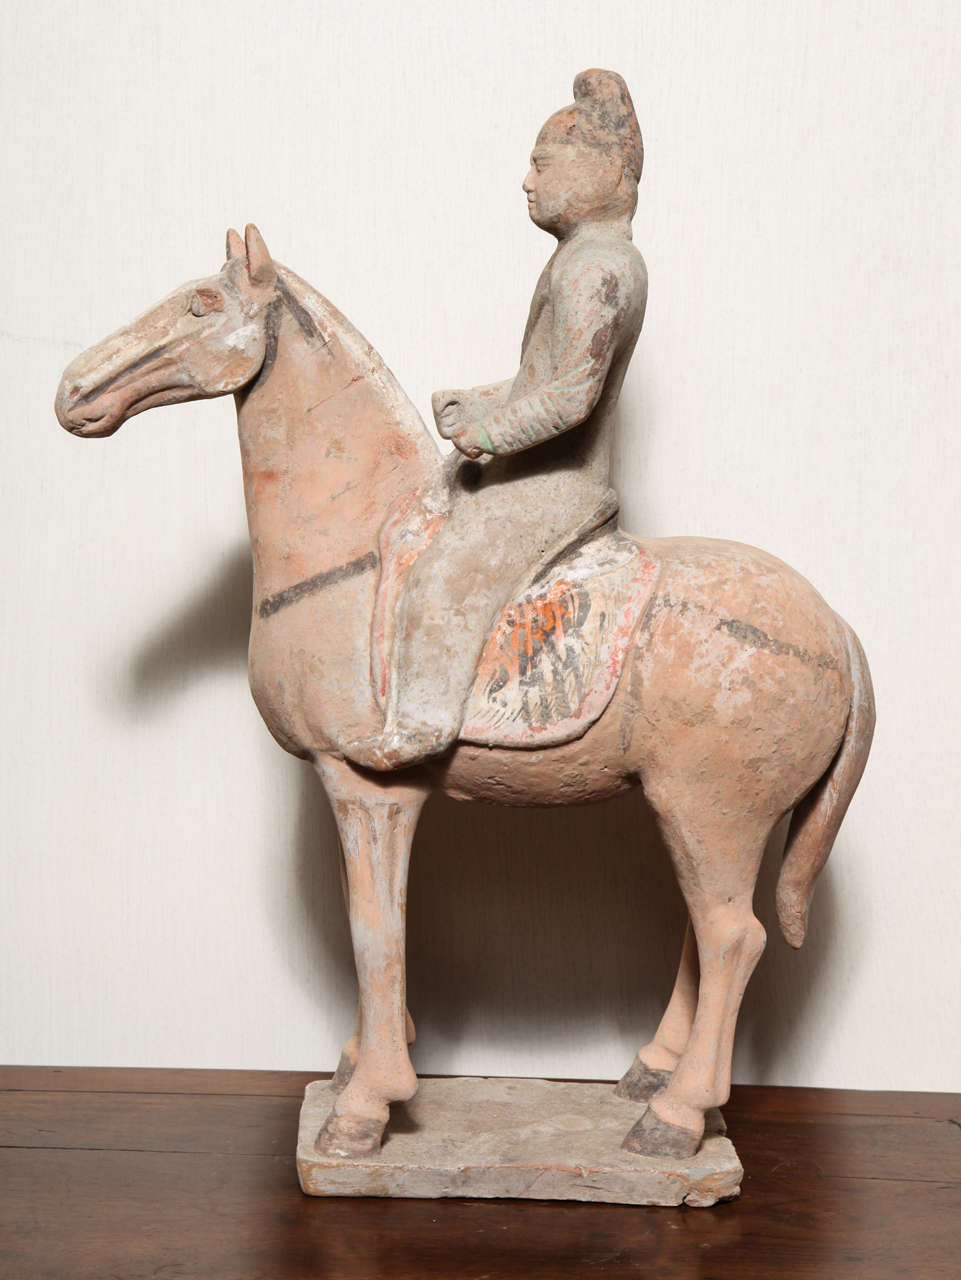 A Chinese Tang dynasty terracotta horse with rider sculpture from the 7th-10th century. This statuette of a horse with rider was made in terracotta during the Tang dynasty (618-907 A.D.), which is regarded as the Classic age of China. Despite its